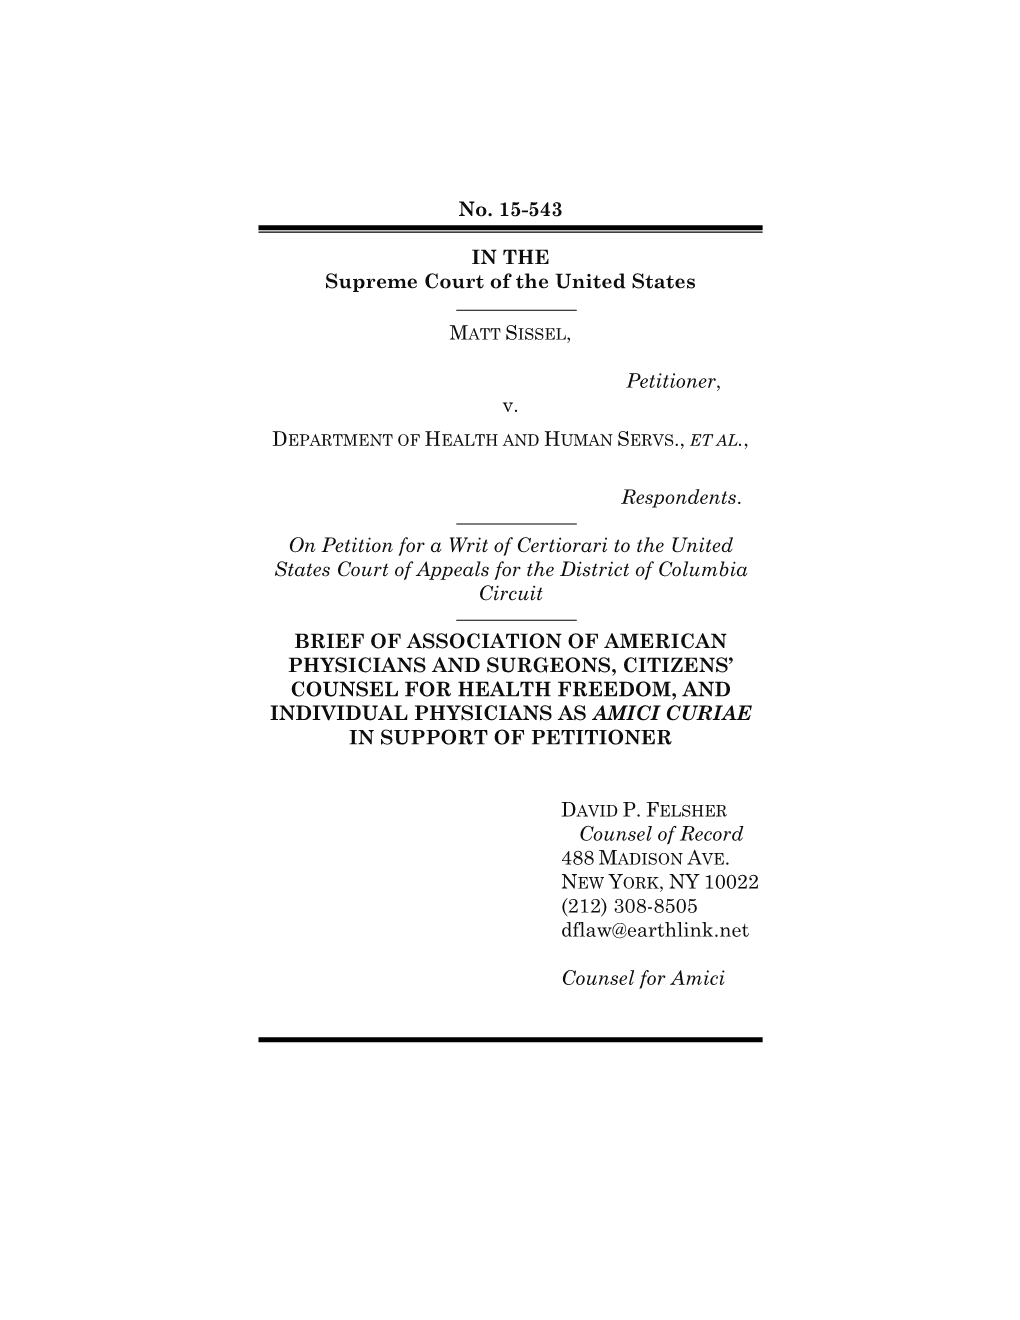 No. 15-543 in the Supreme Court of the United States Petitioner, V